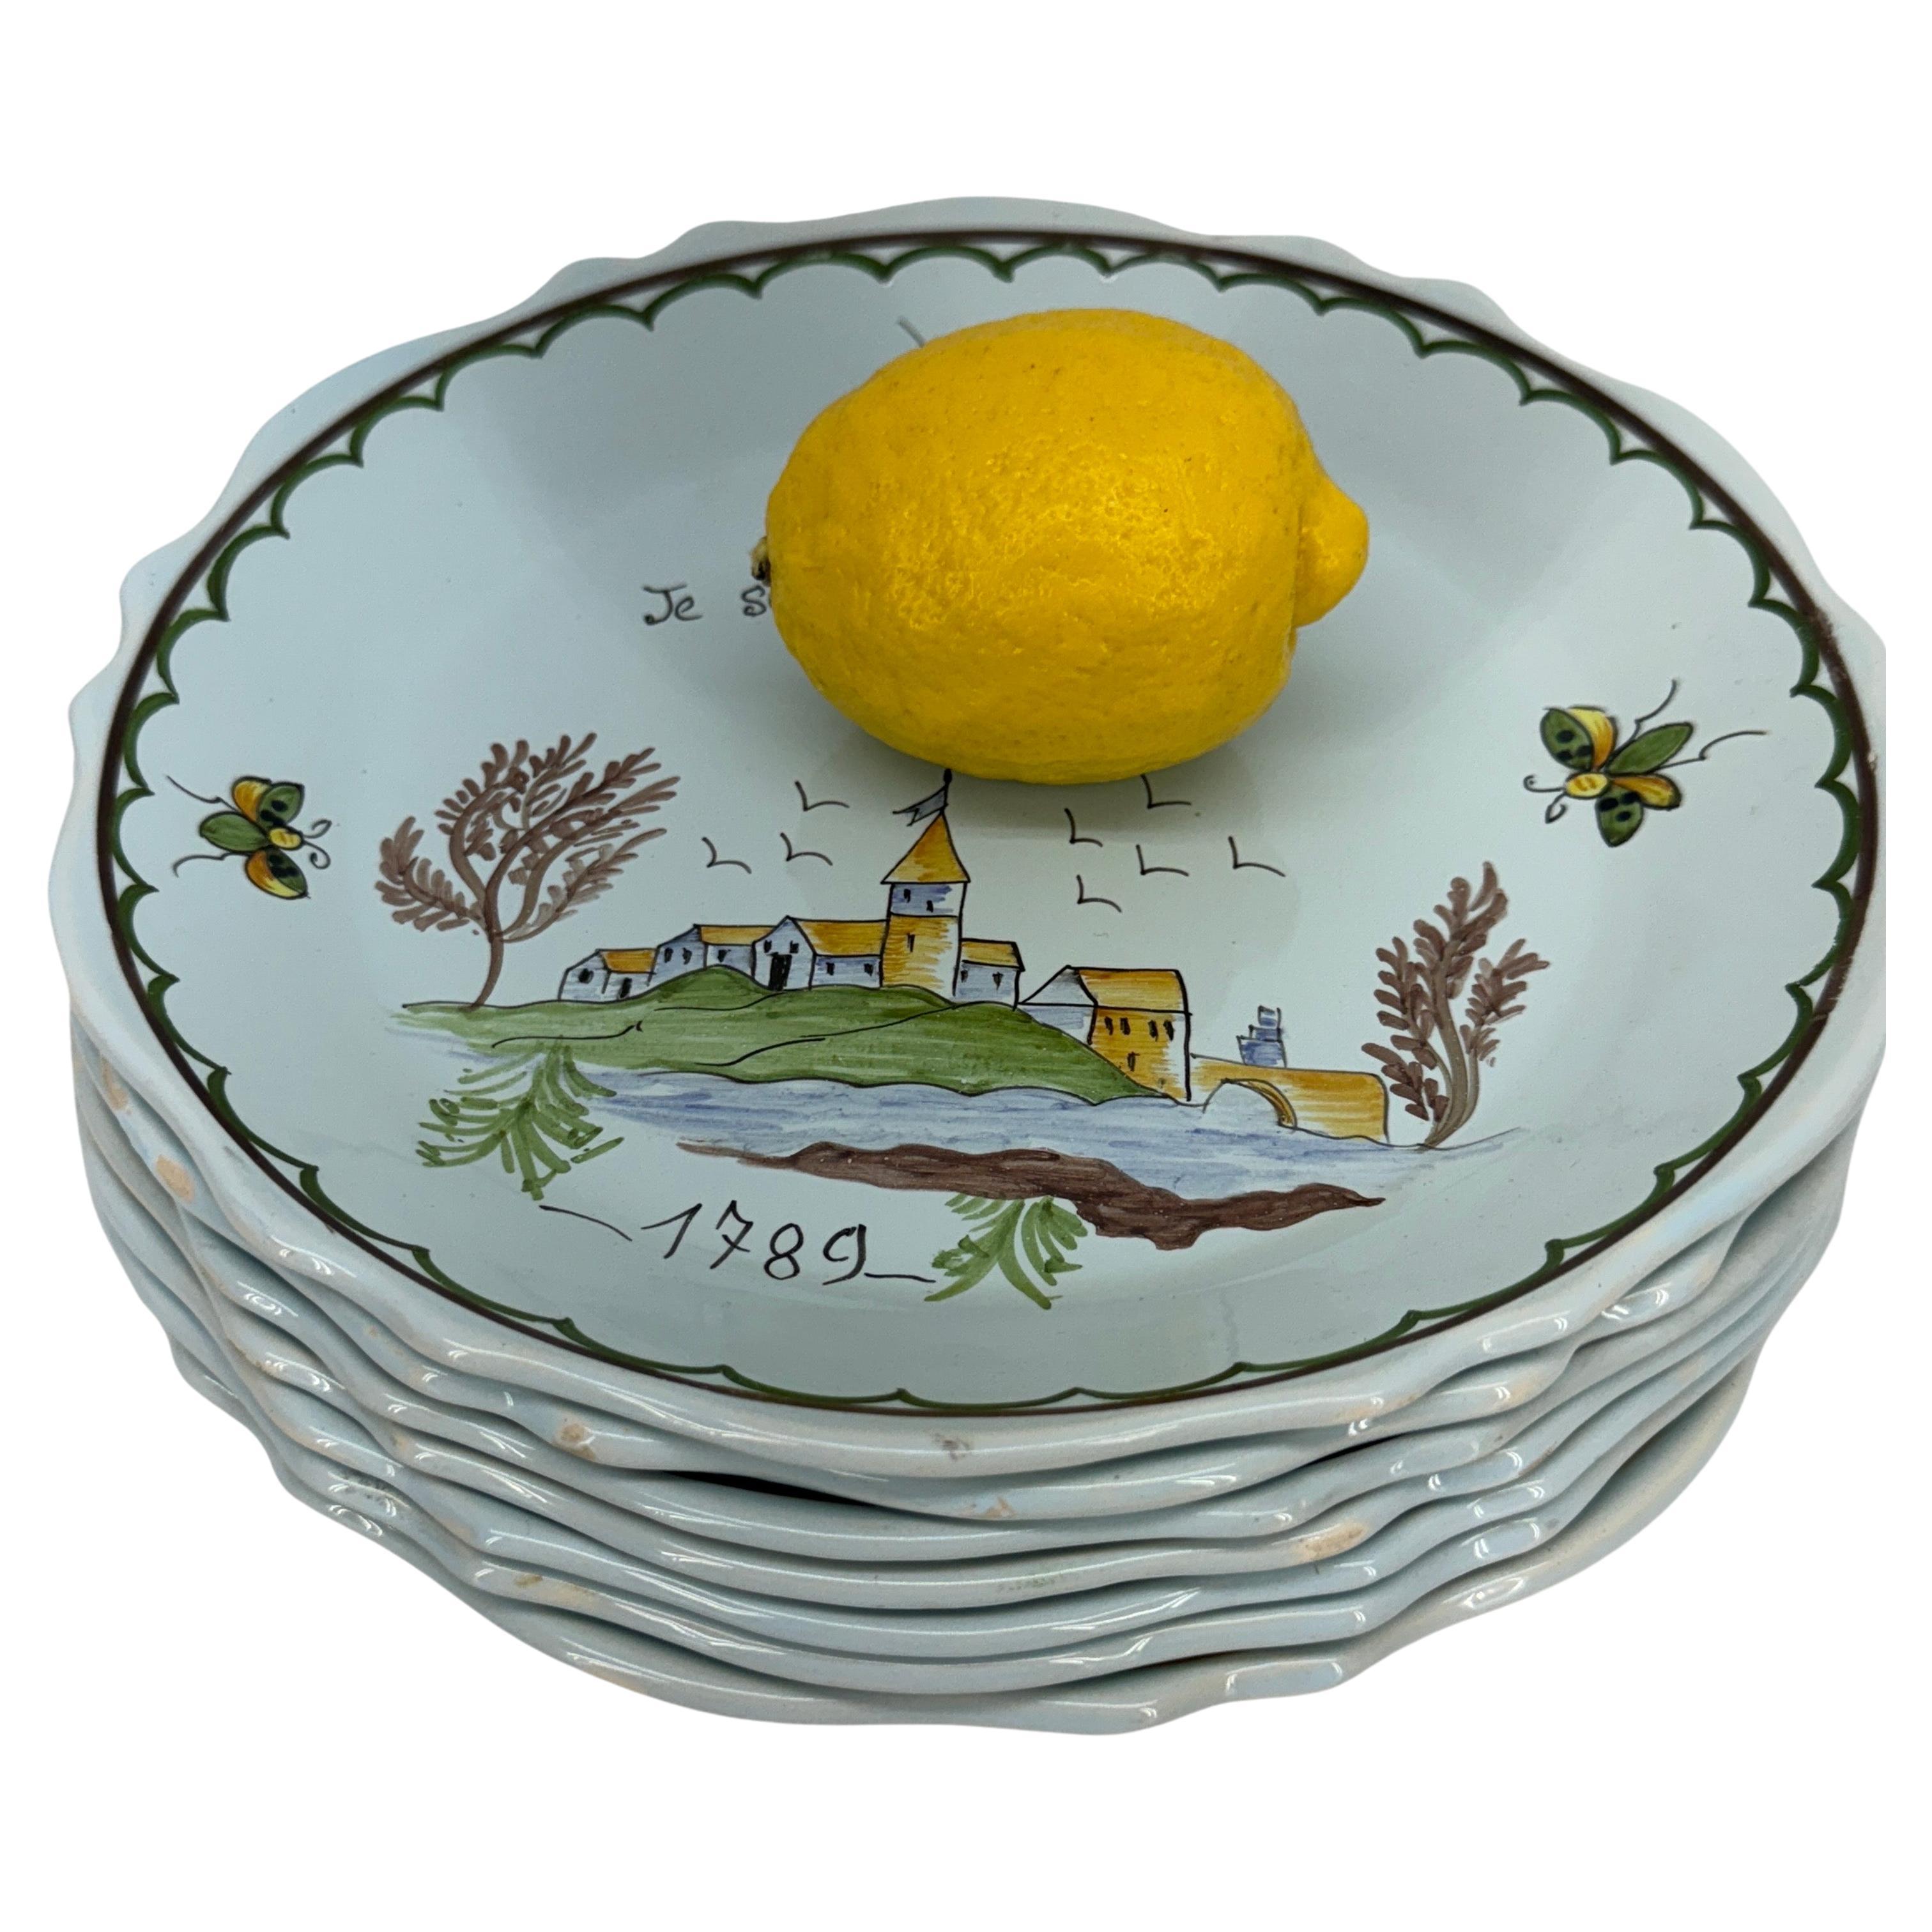 French Liberte 1789 Faience Revolution Plates, France 

This collection of glazed fait main or hand-painted scalloped plates commemorate the bicentennial of the French Revolution. The words on these plates feature Je Suis Liberte and L'immortalite.